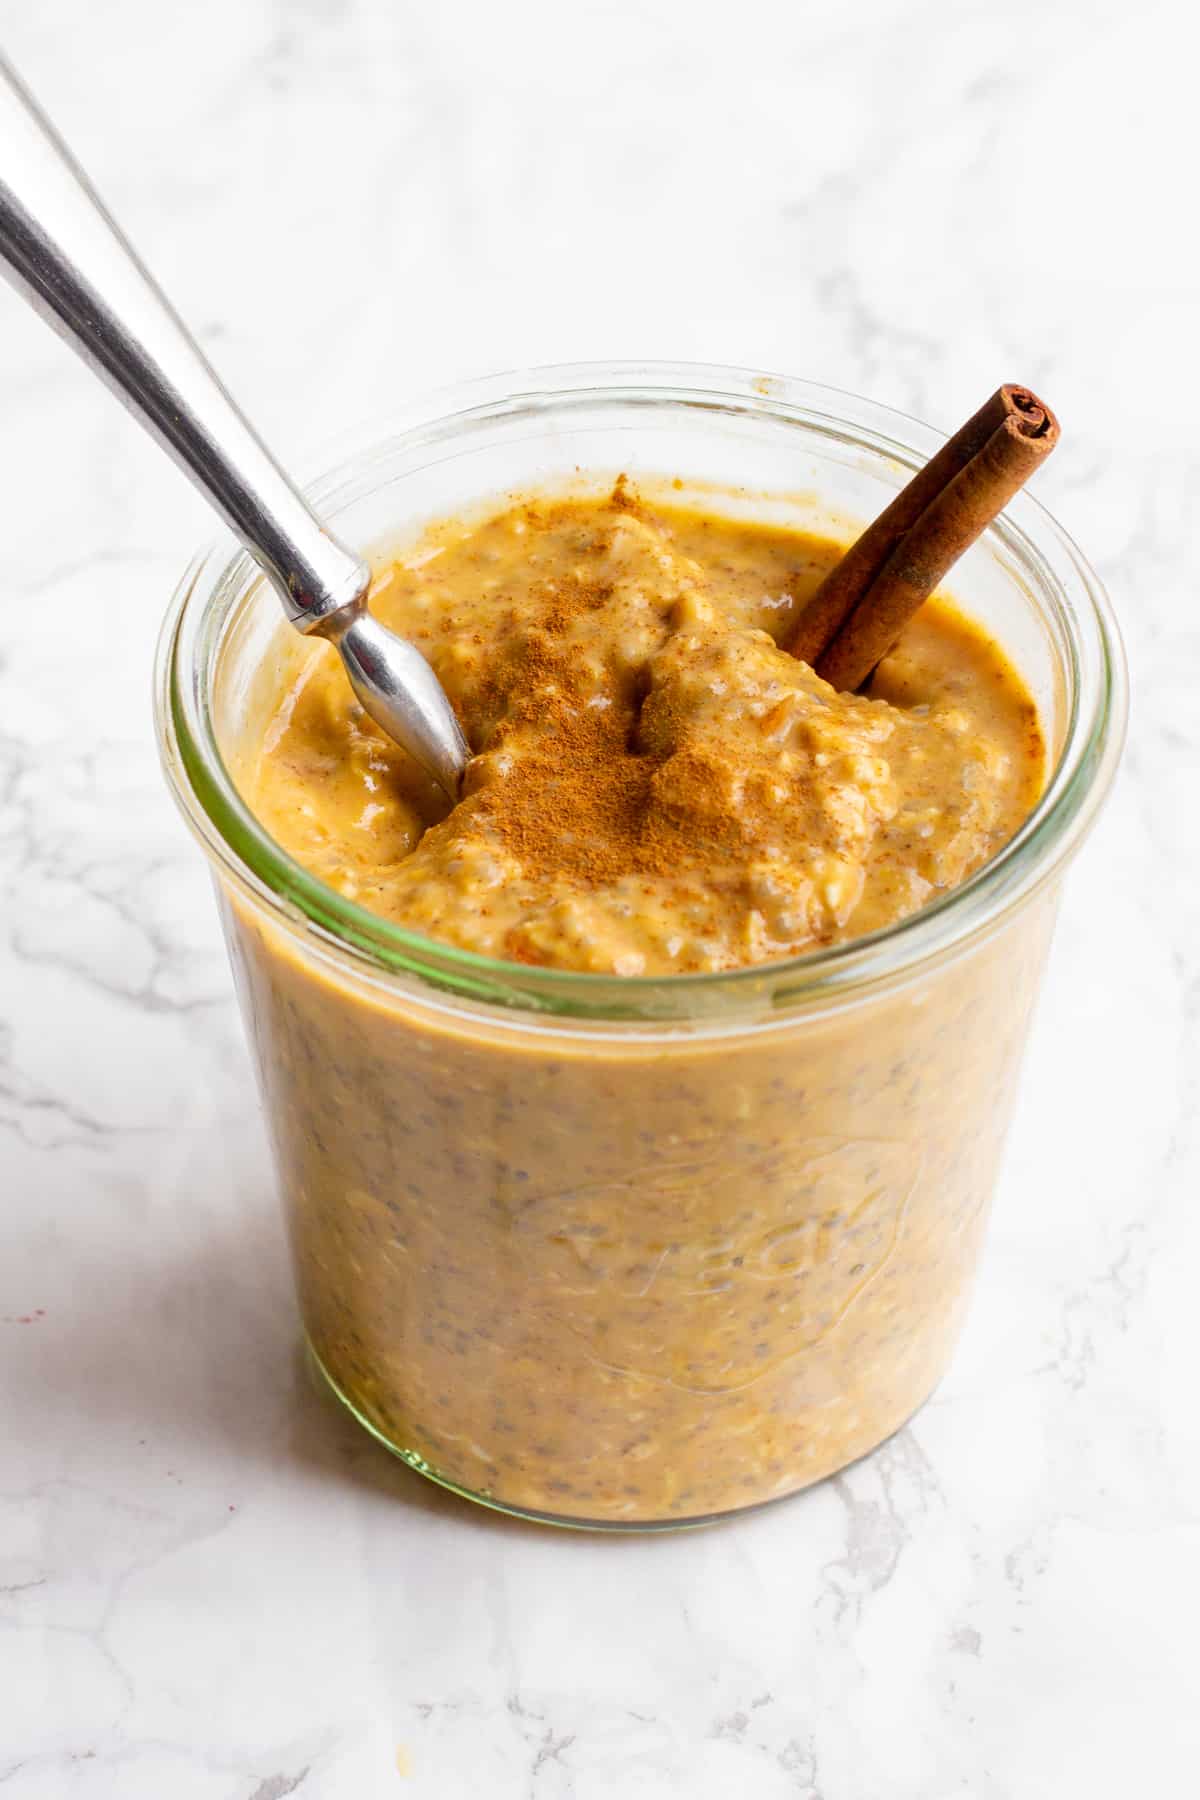 How to Make Healthy Pumpkin Spice Overnight Oats